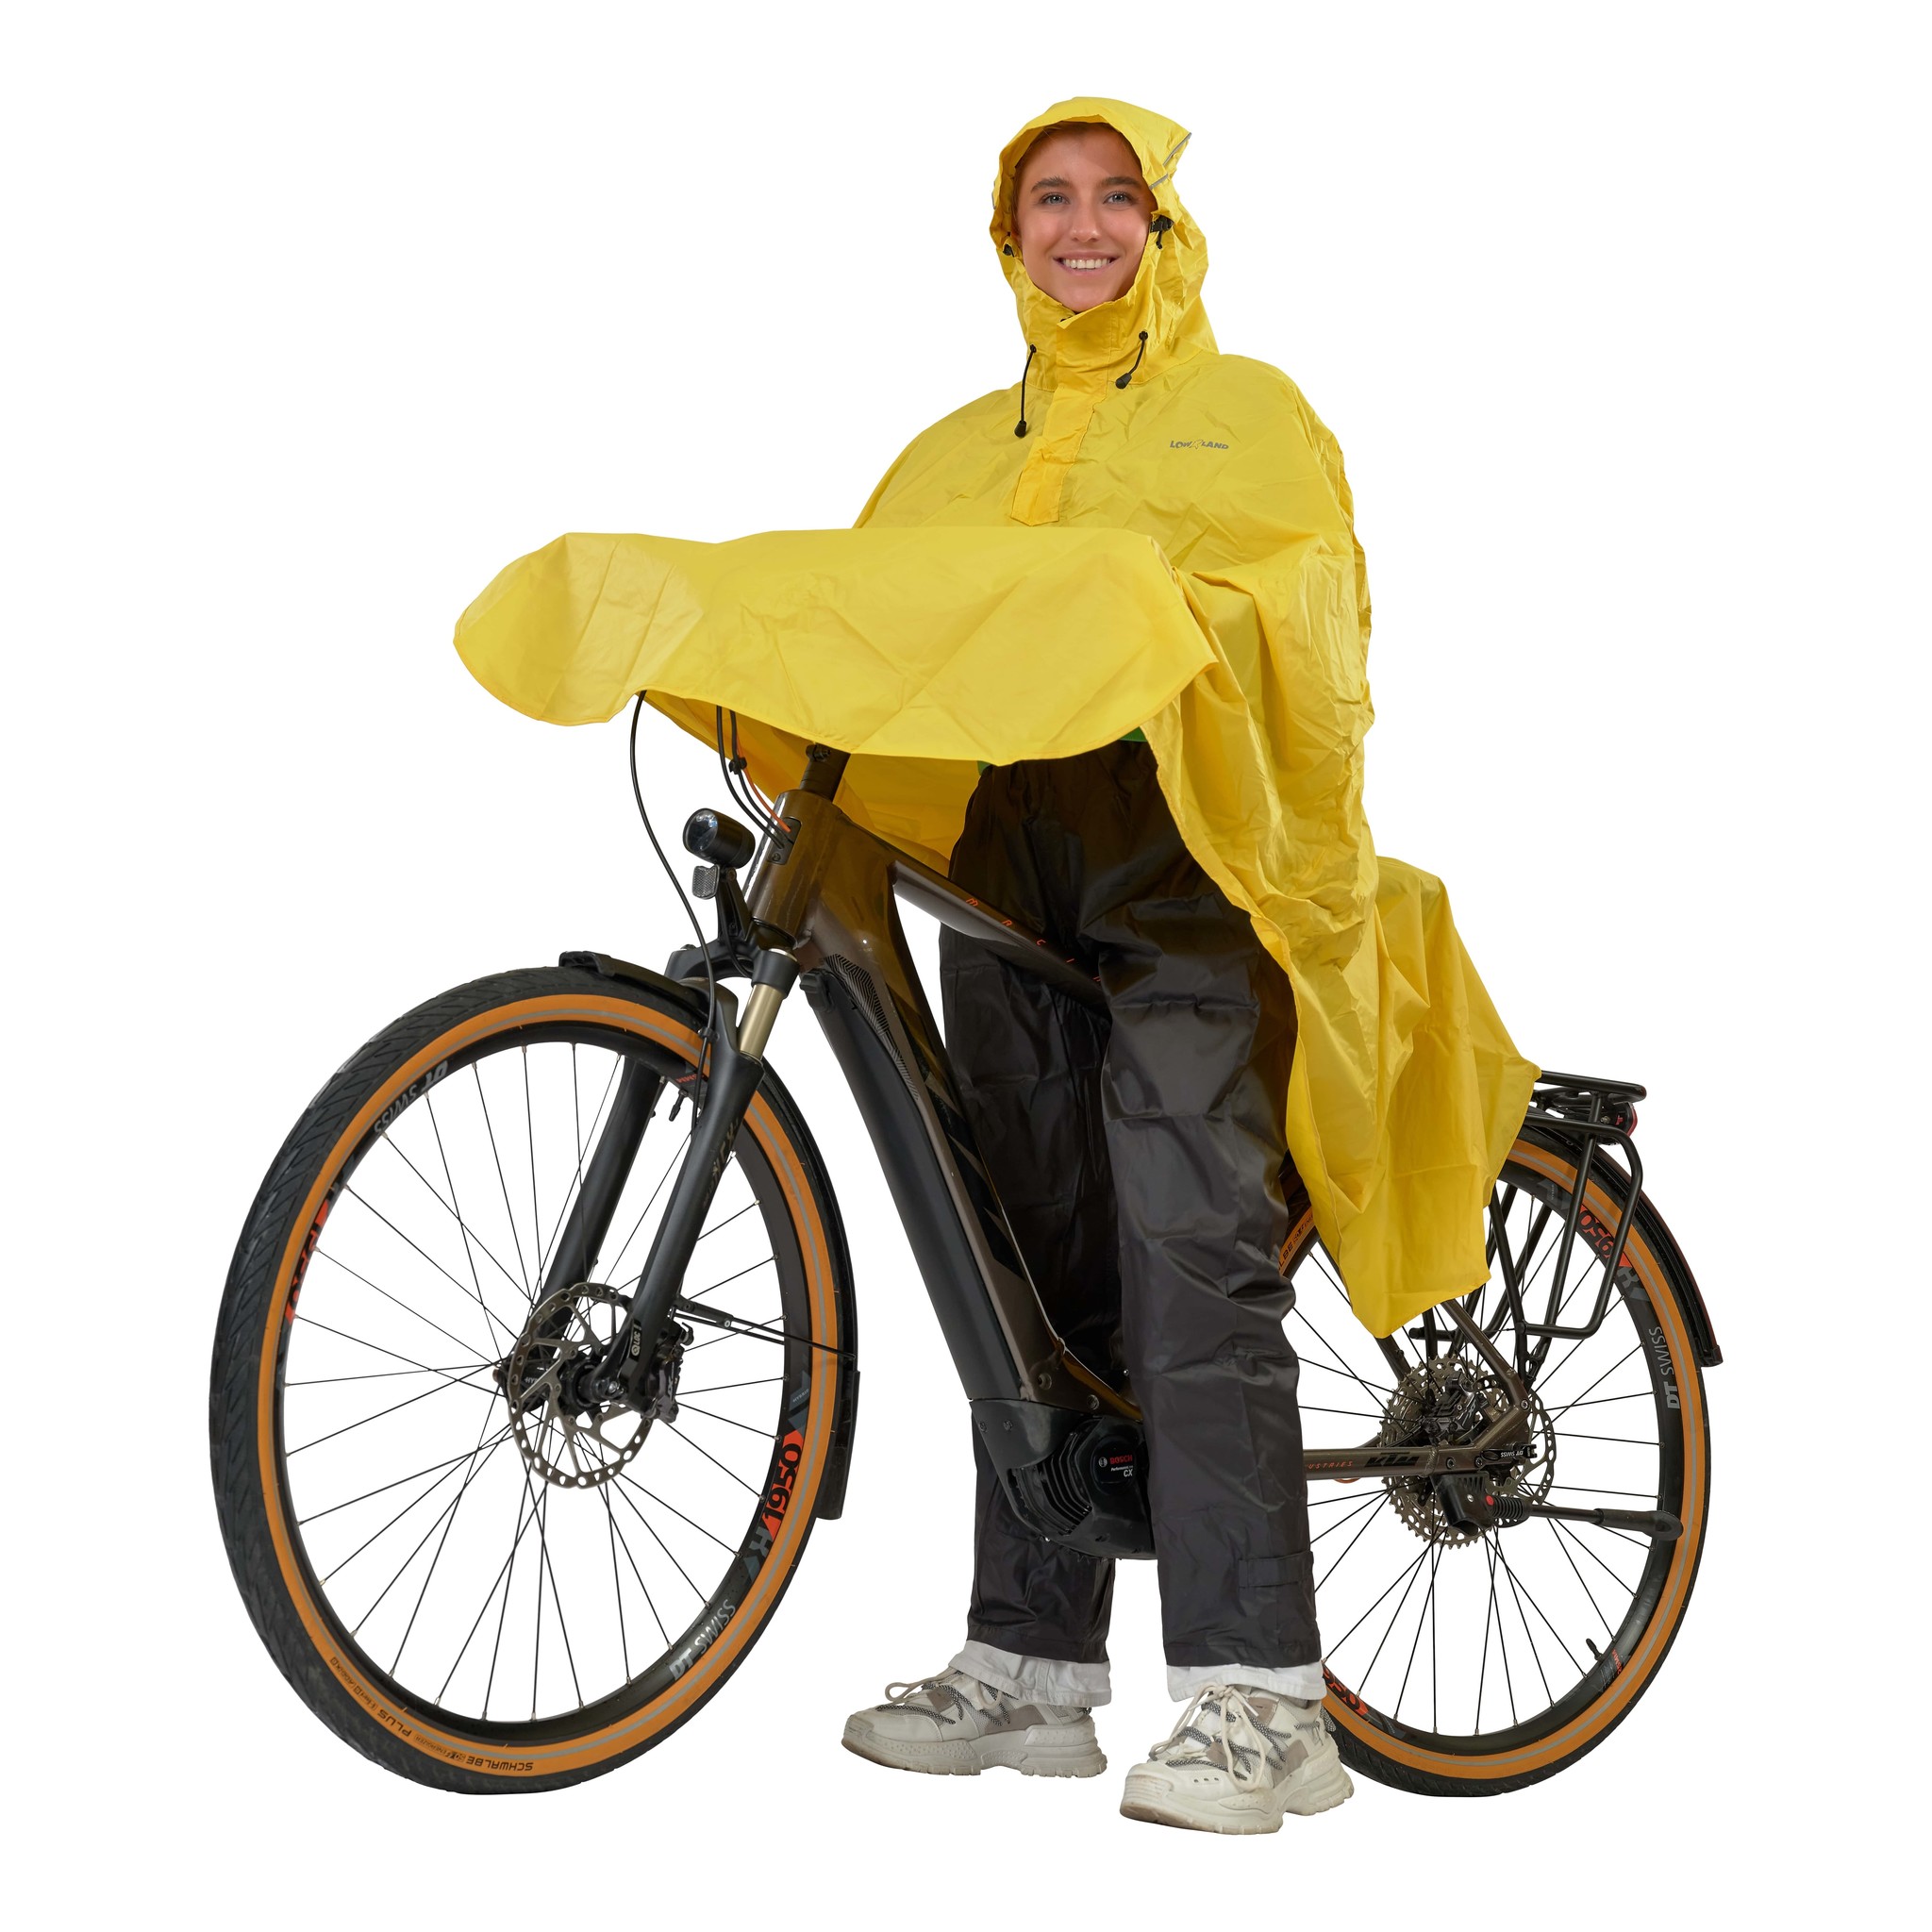 LOWLAND OUTDOOR® Poncho Impermeable con Capucha Chubasquero para Ciclista -  Lowland Outdoor